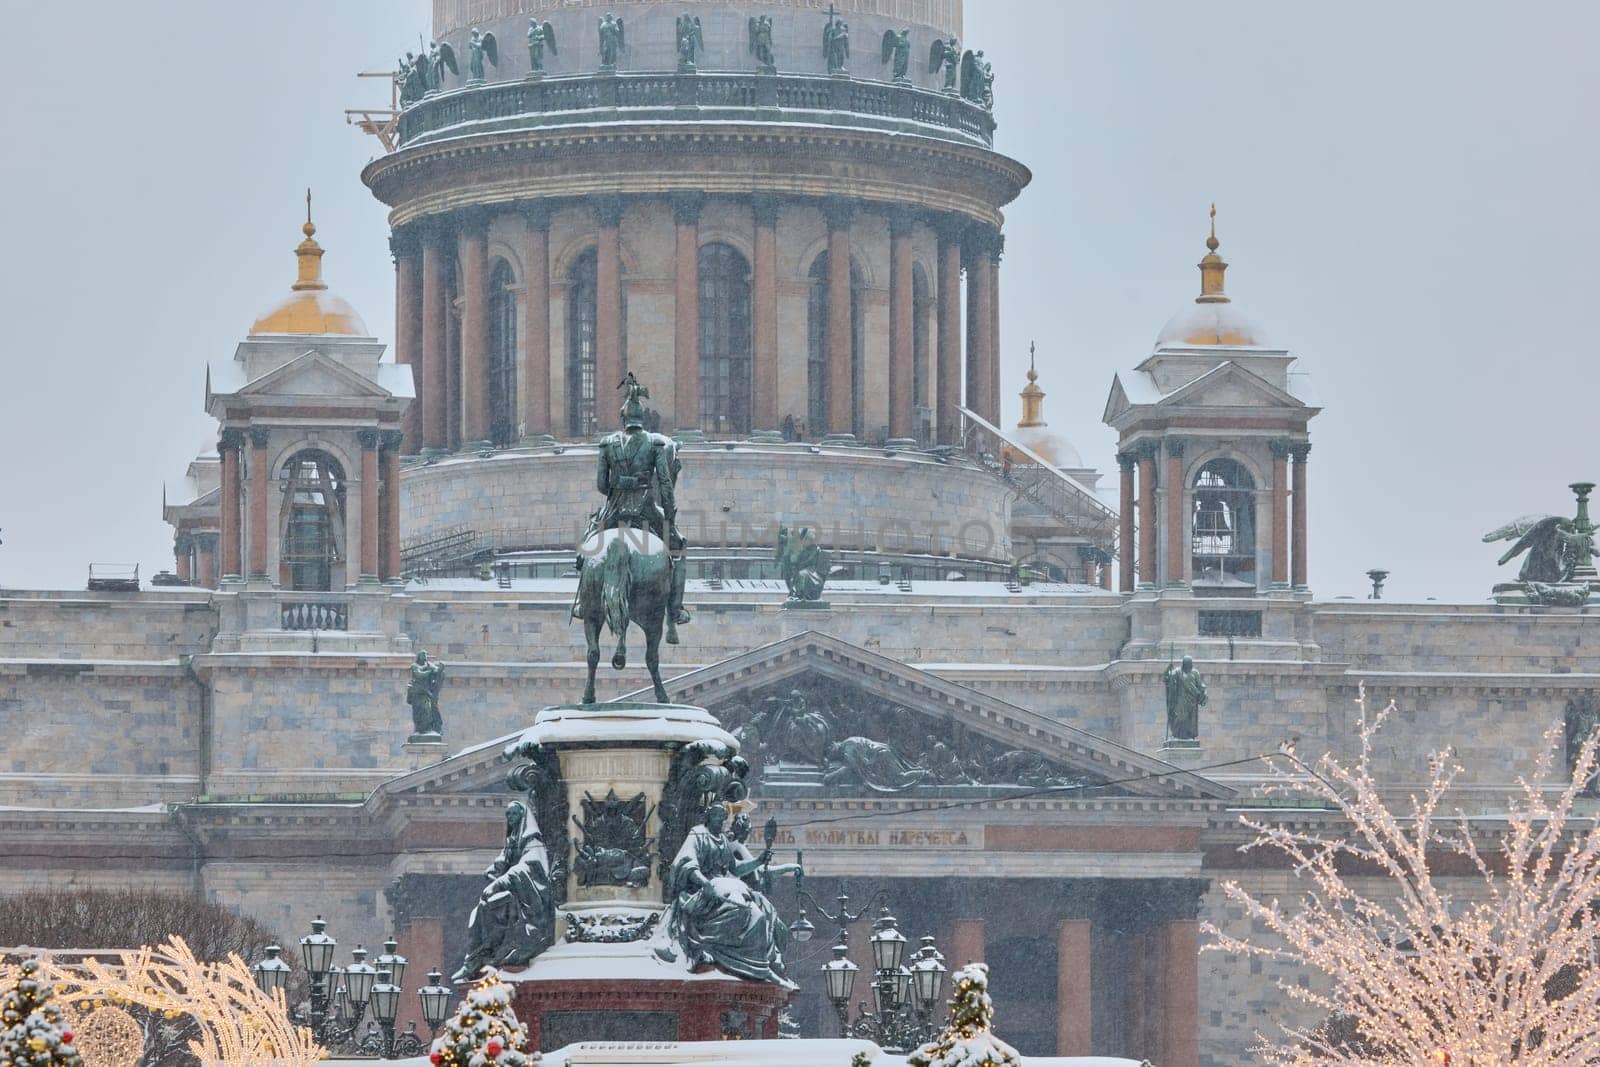 Colonnade of St. Isaac Cathedral and the monument to Emperor Nicholas II during snowstorm in St. Petersburg - Russia by vladimirdrozdin